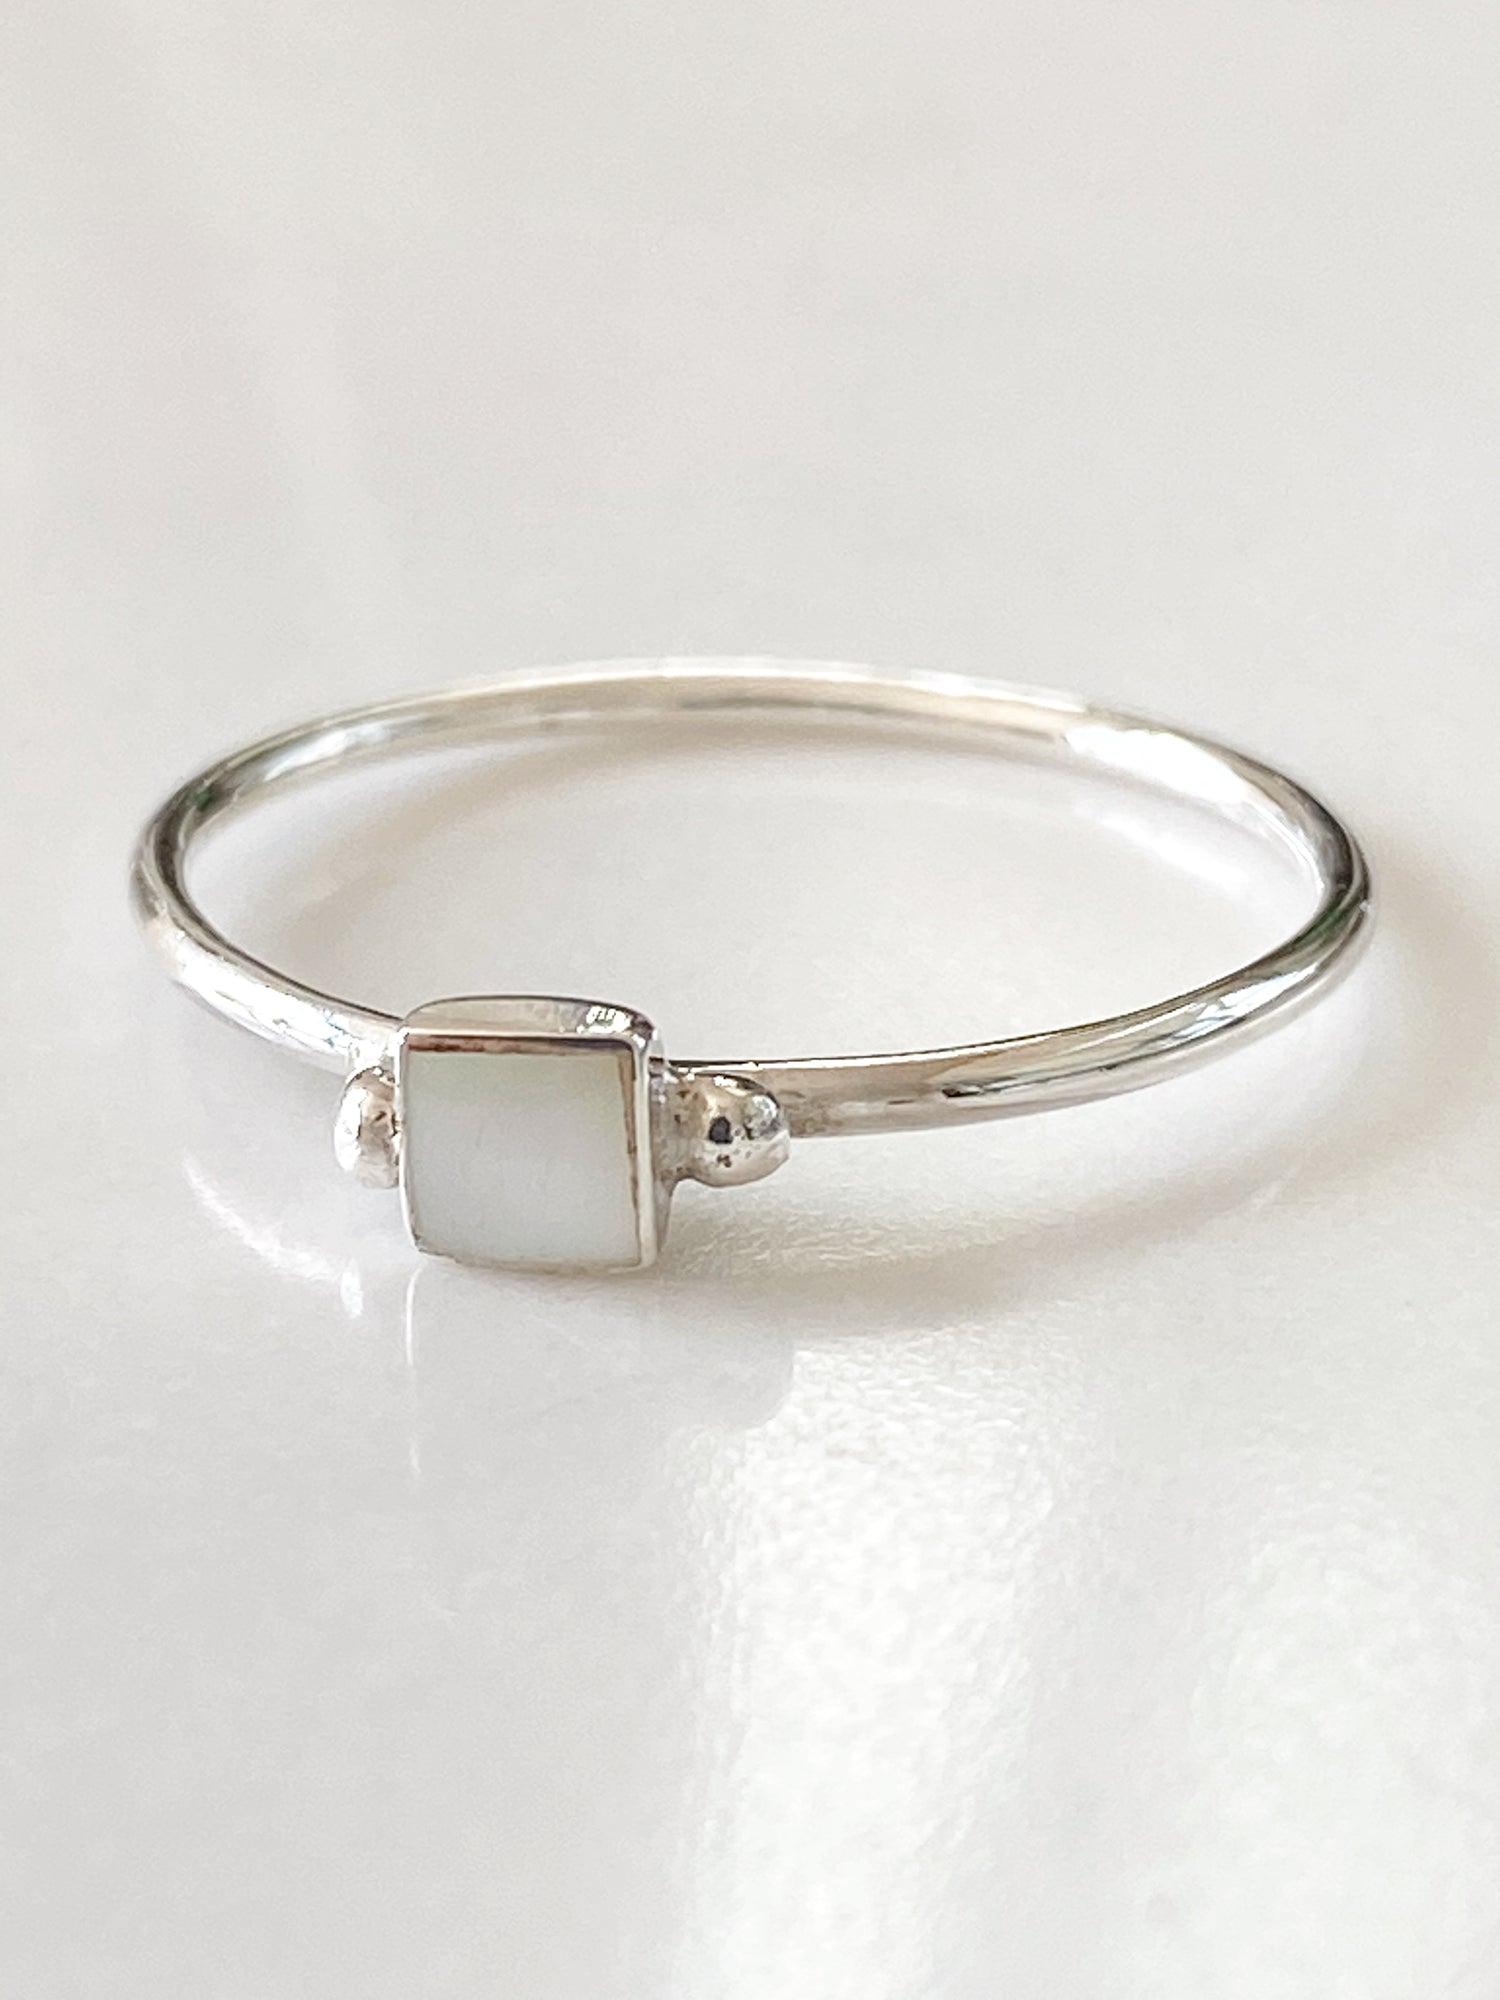 Mother of Pearl Silver Rings - White, Square, and more.. by OrlaSilver